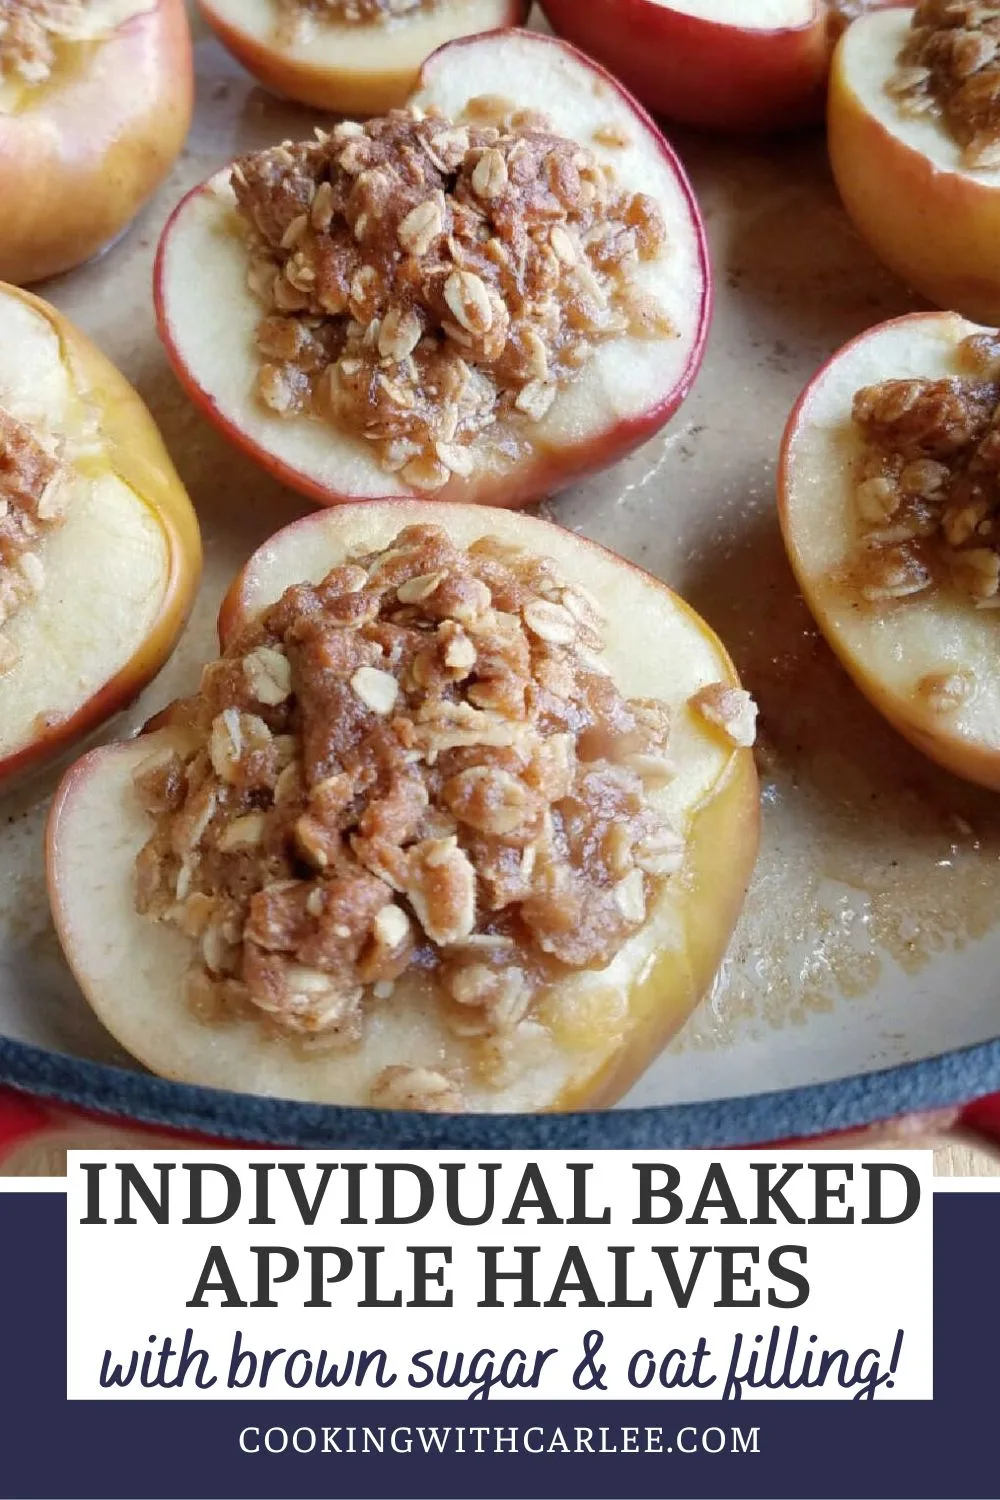 The perfect individual sized dessert, these baked apple halves are the perfect mix of baked apples and crispy brown sugar and oatmeal topping. Serve them with a scoop of ice cream for a fabulous dessert.